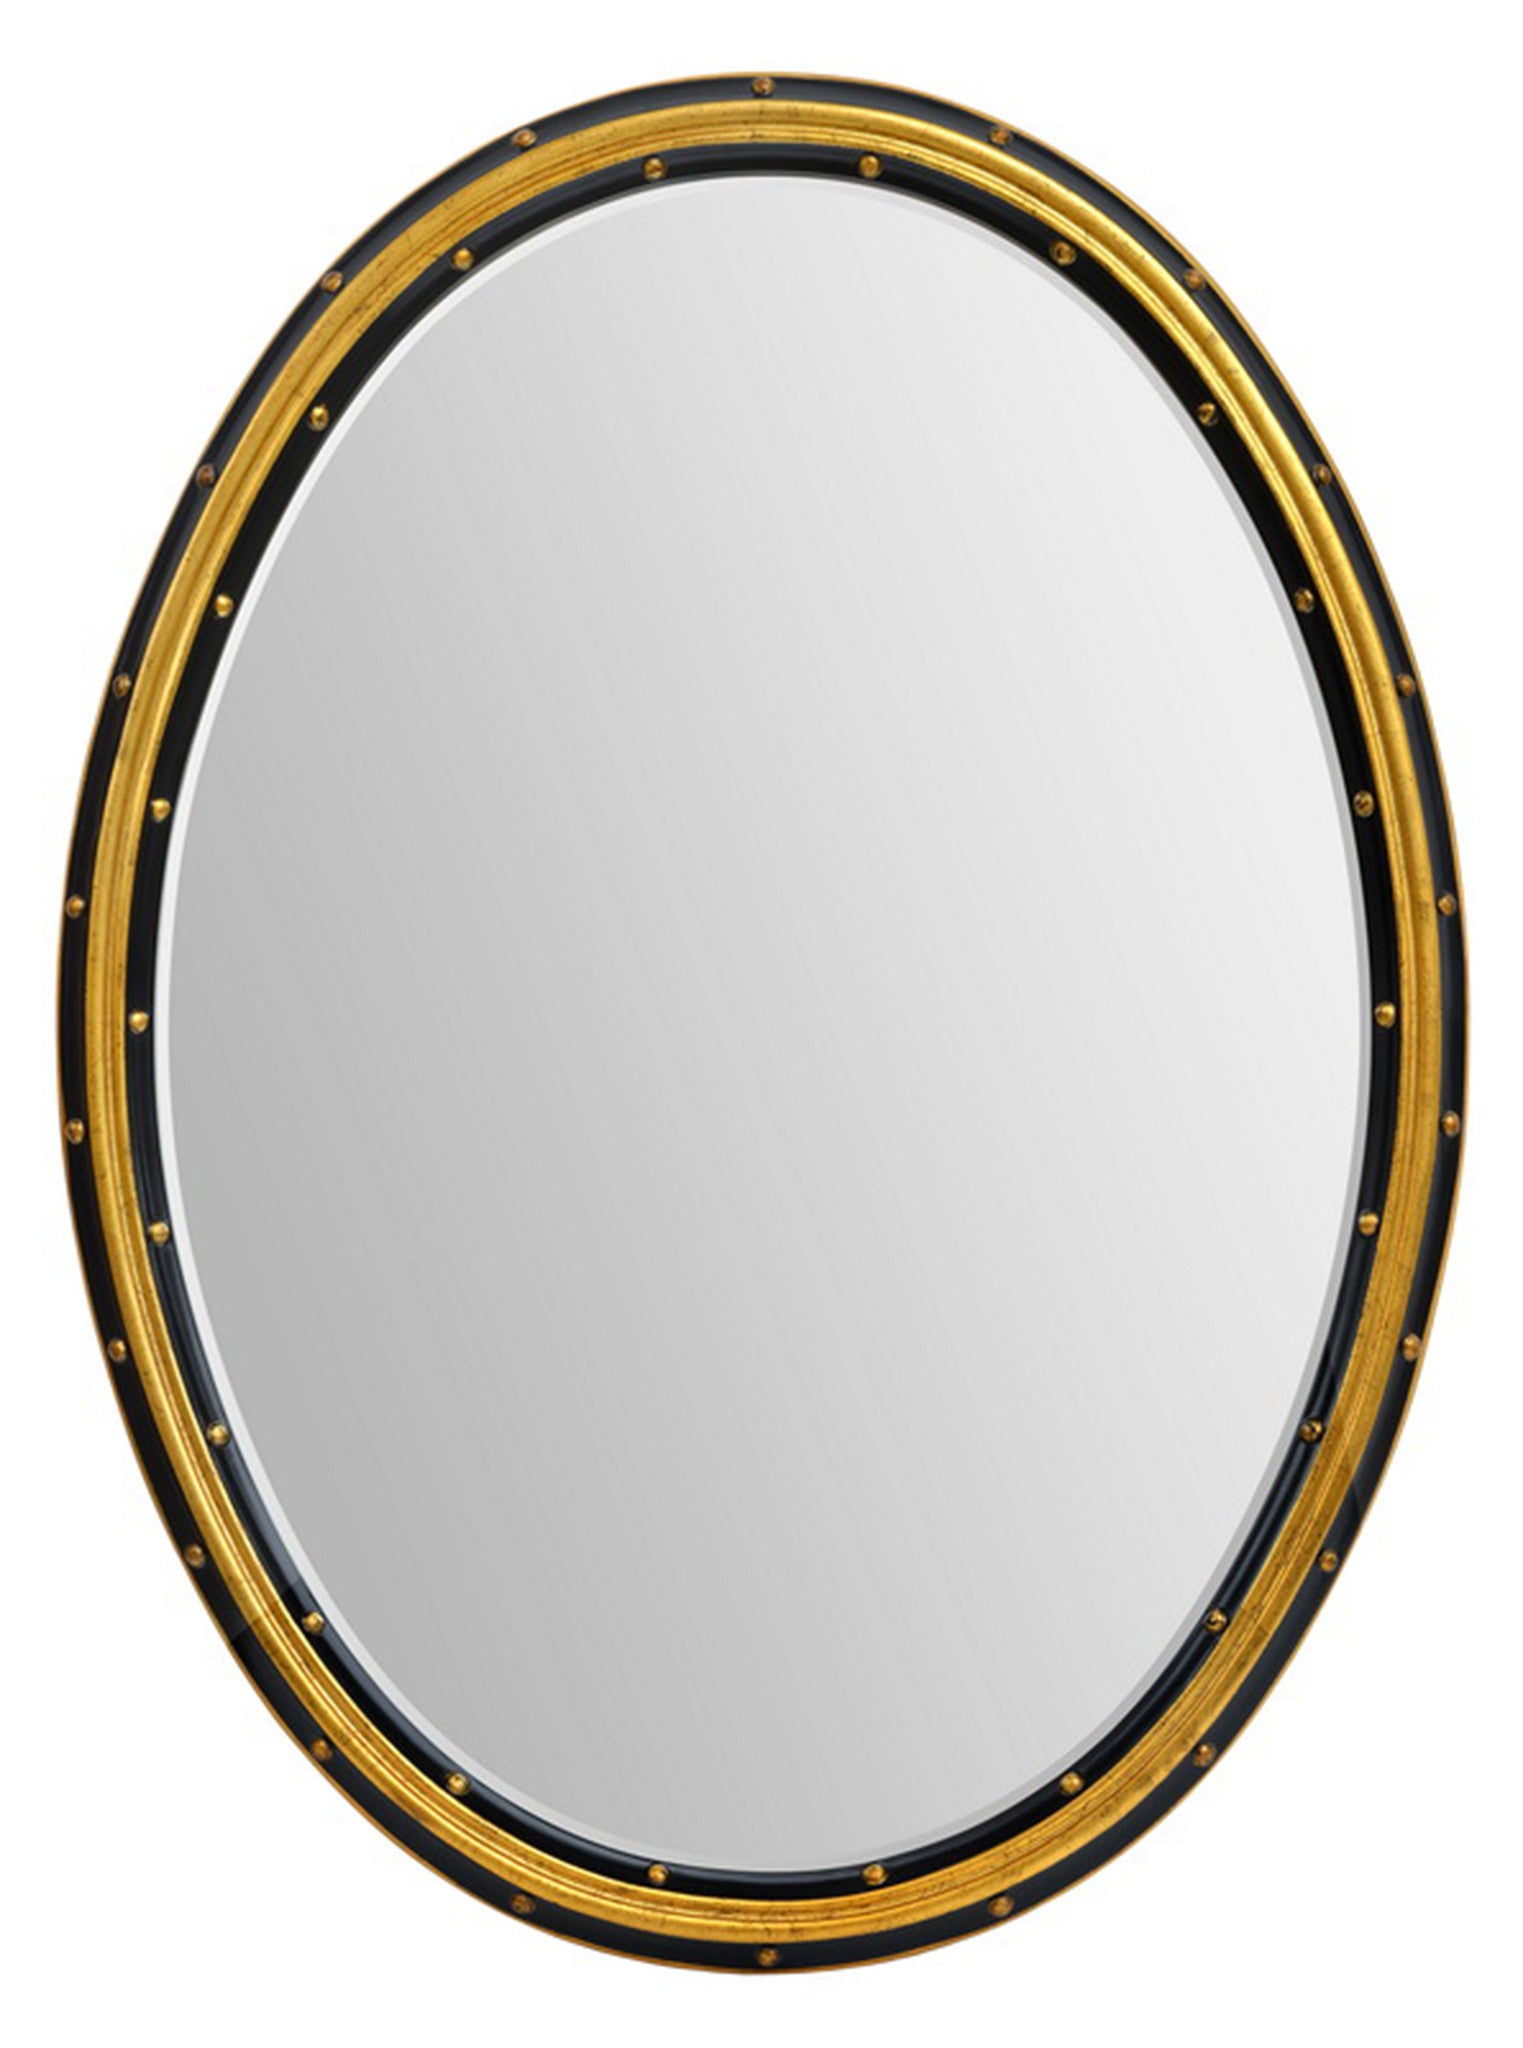 Oval shaped mirror